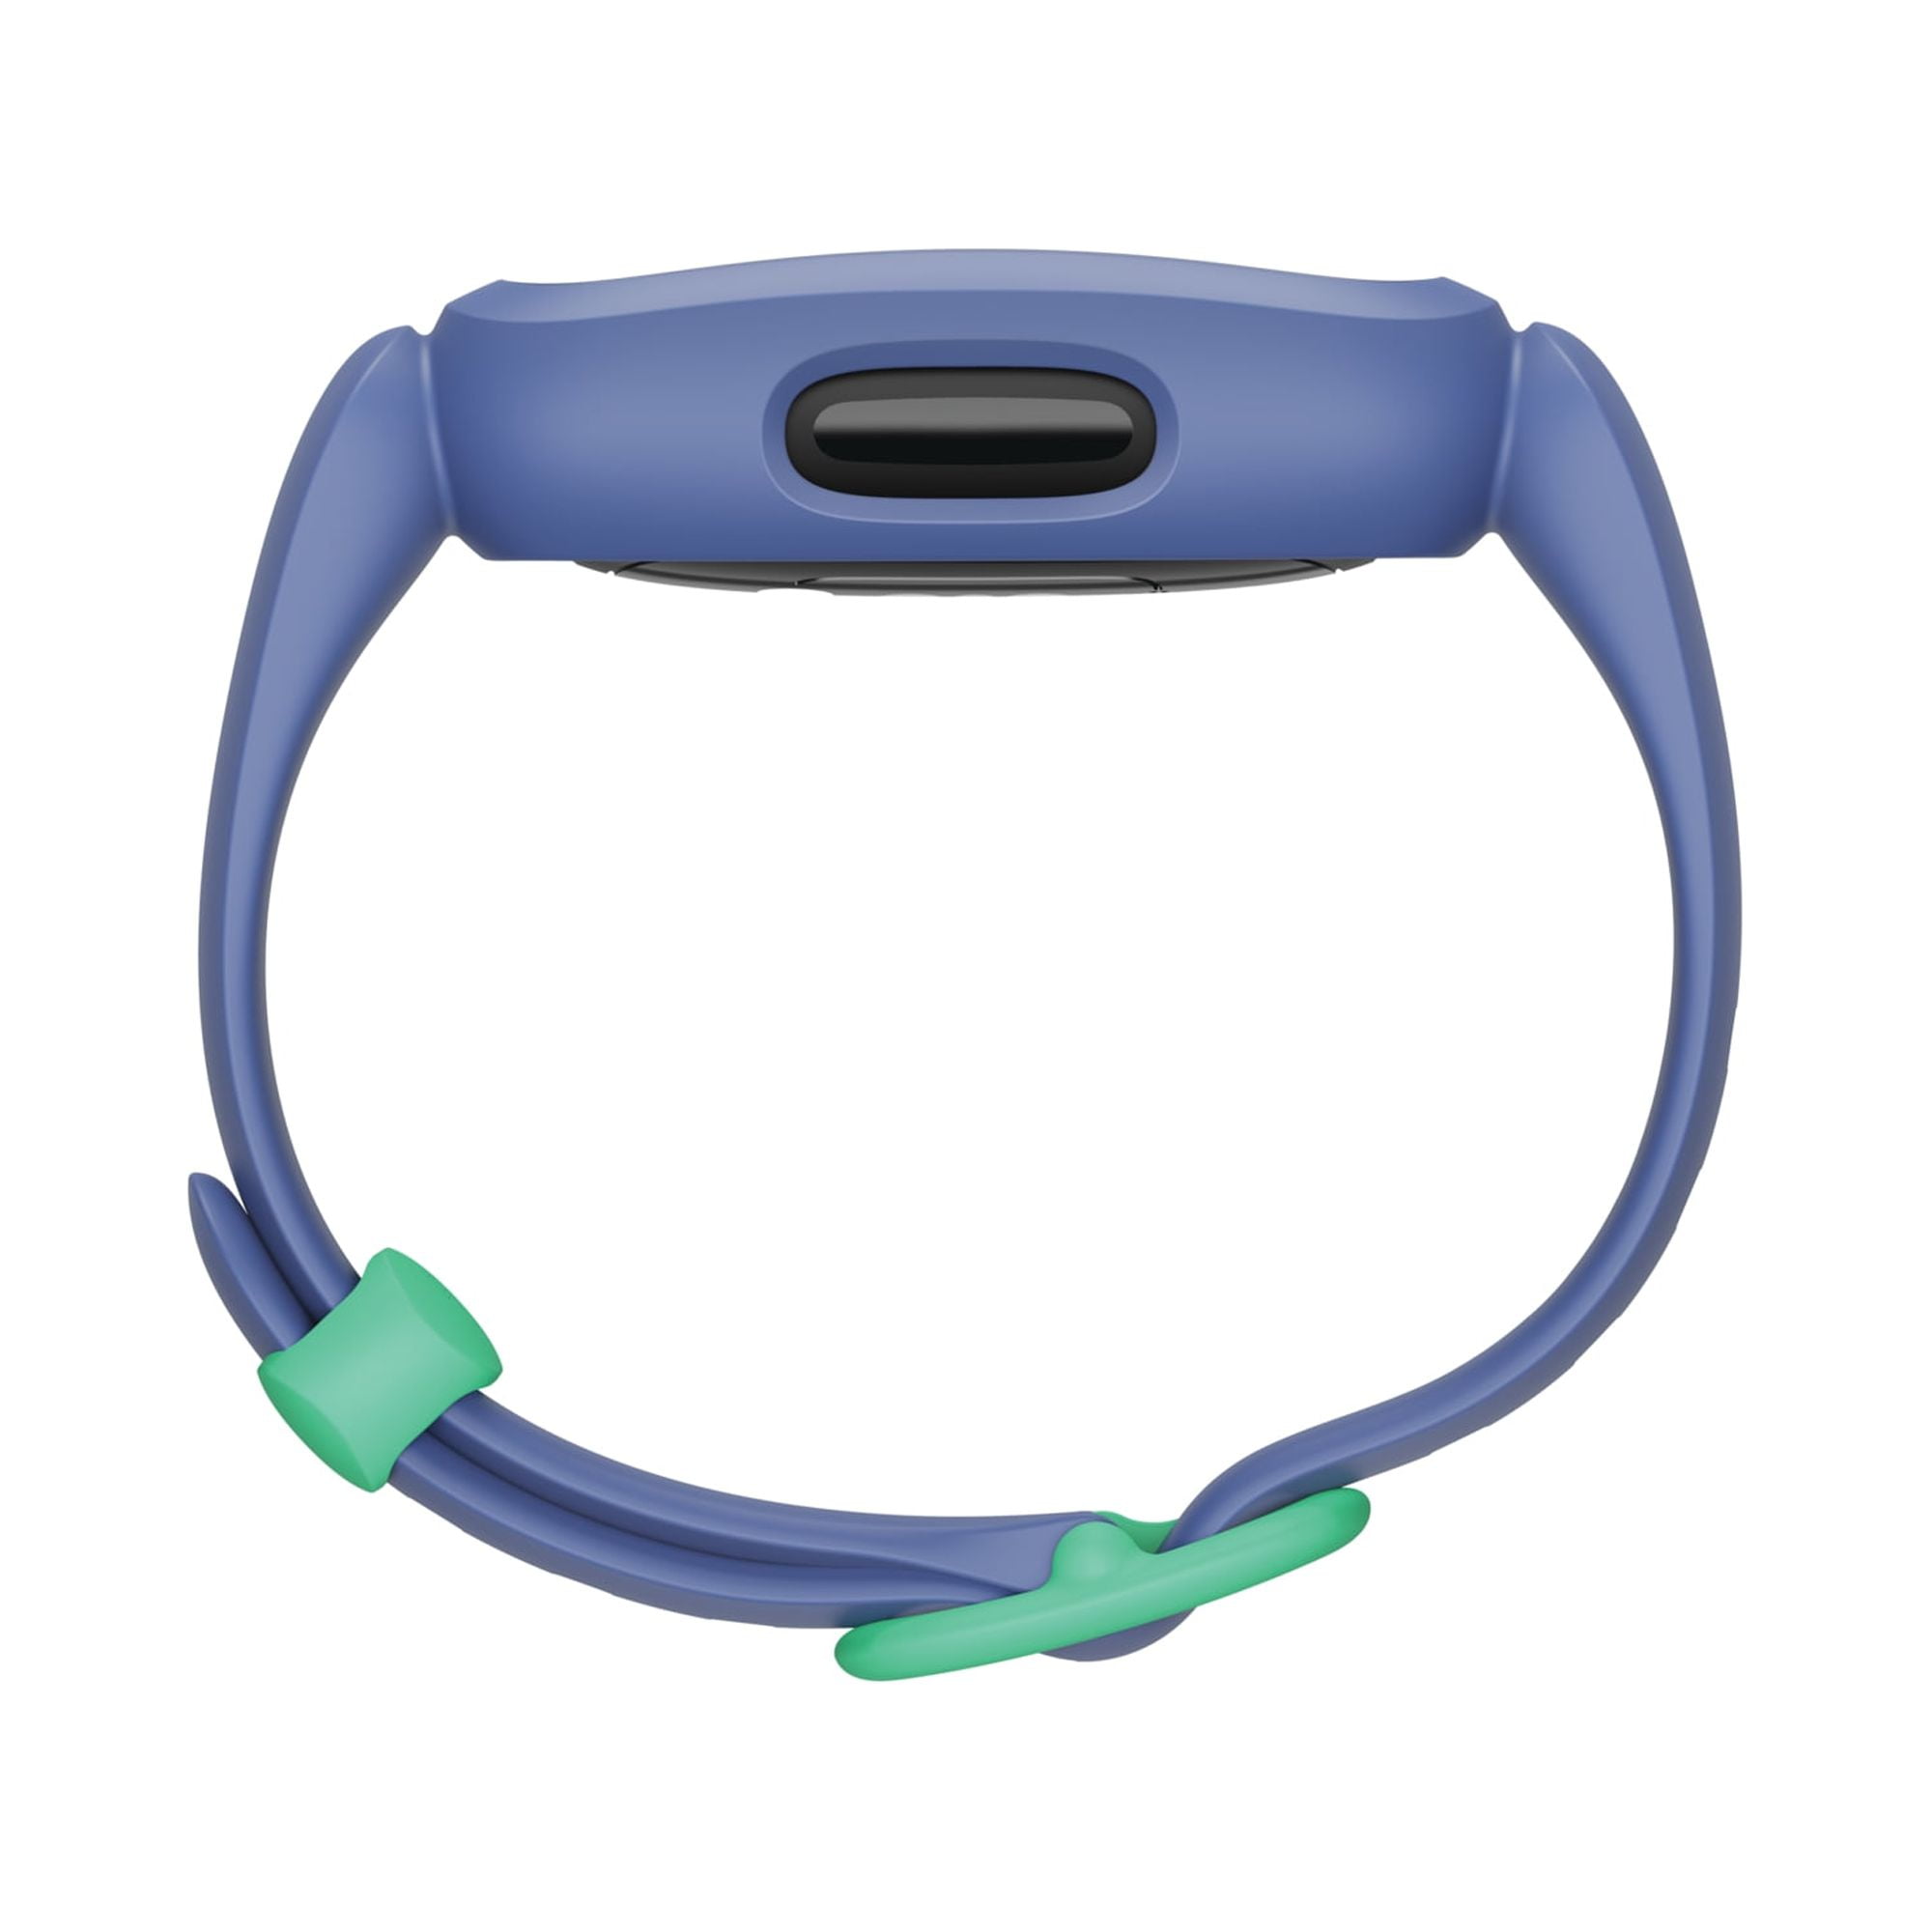 Fitbit Ace 3 Activity Tracker for Kids - Cosmic Blue/Astro Green